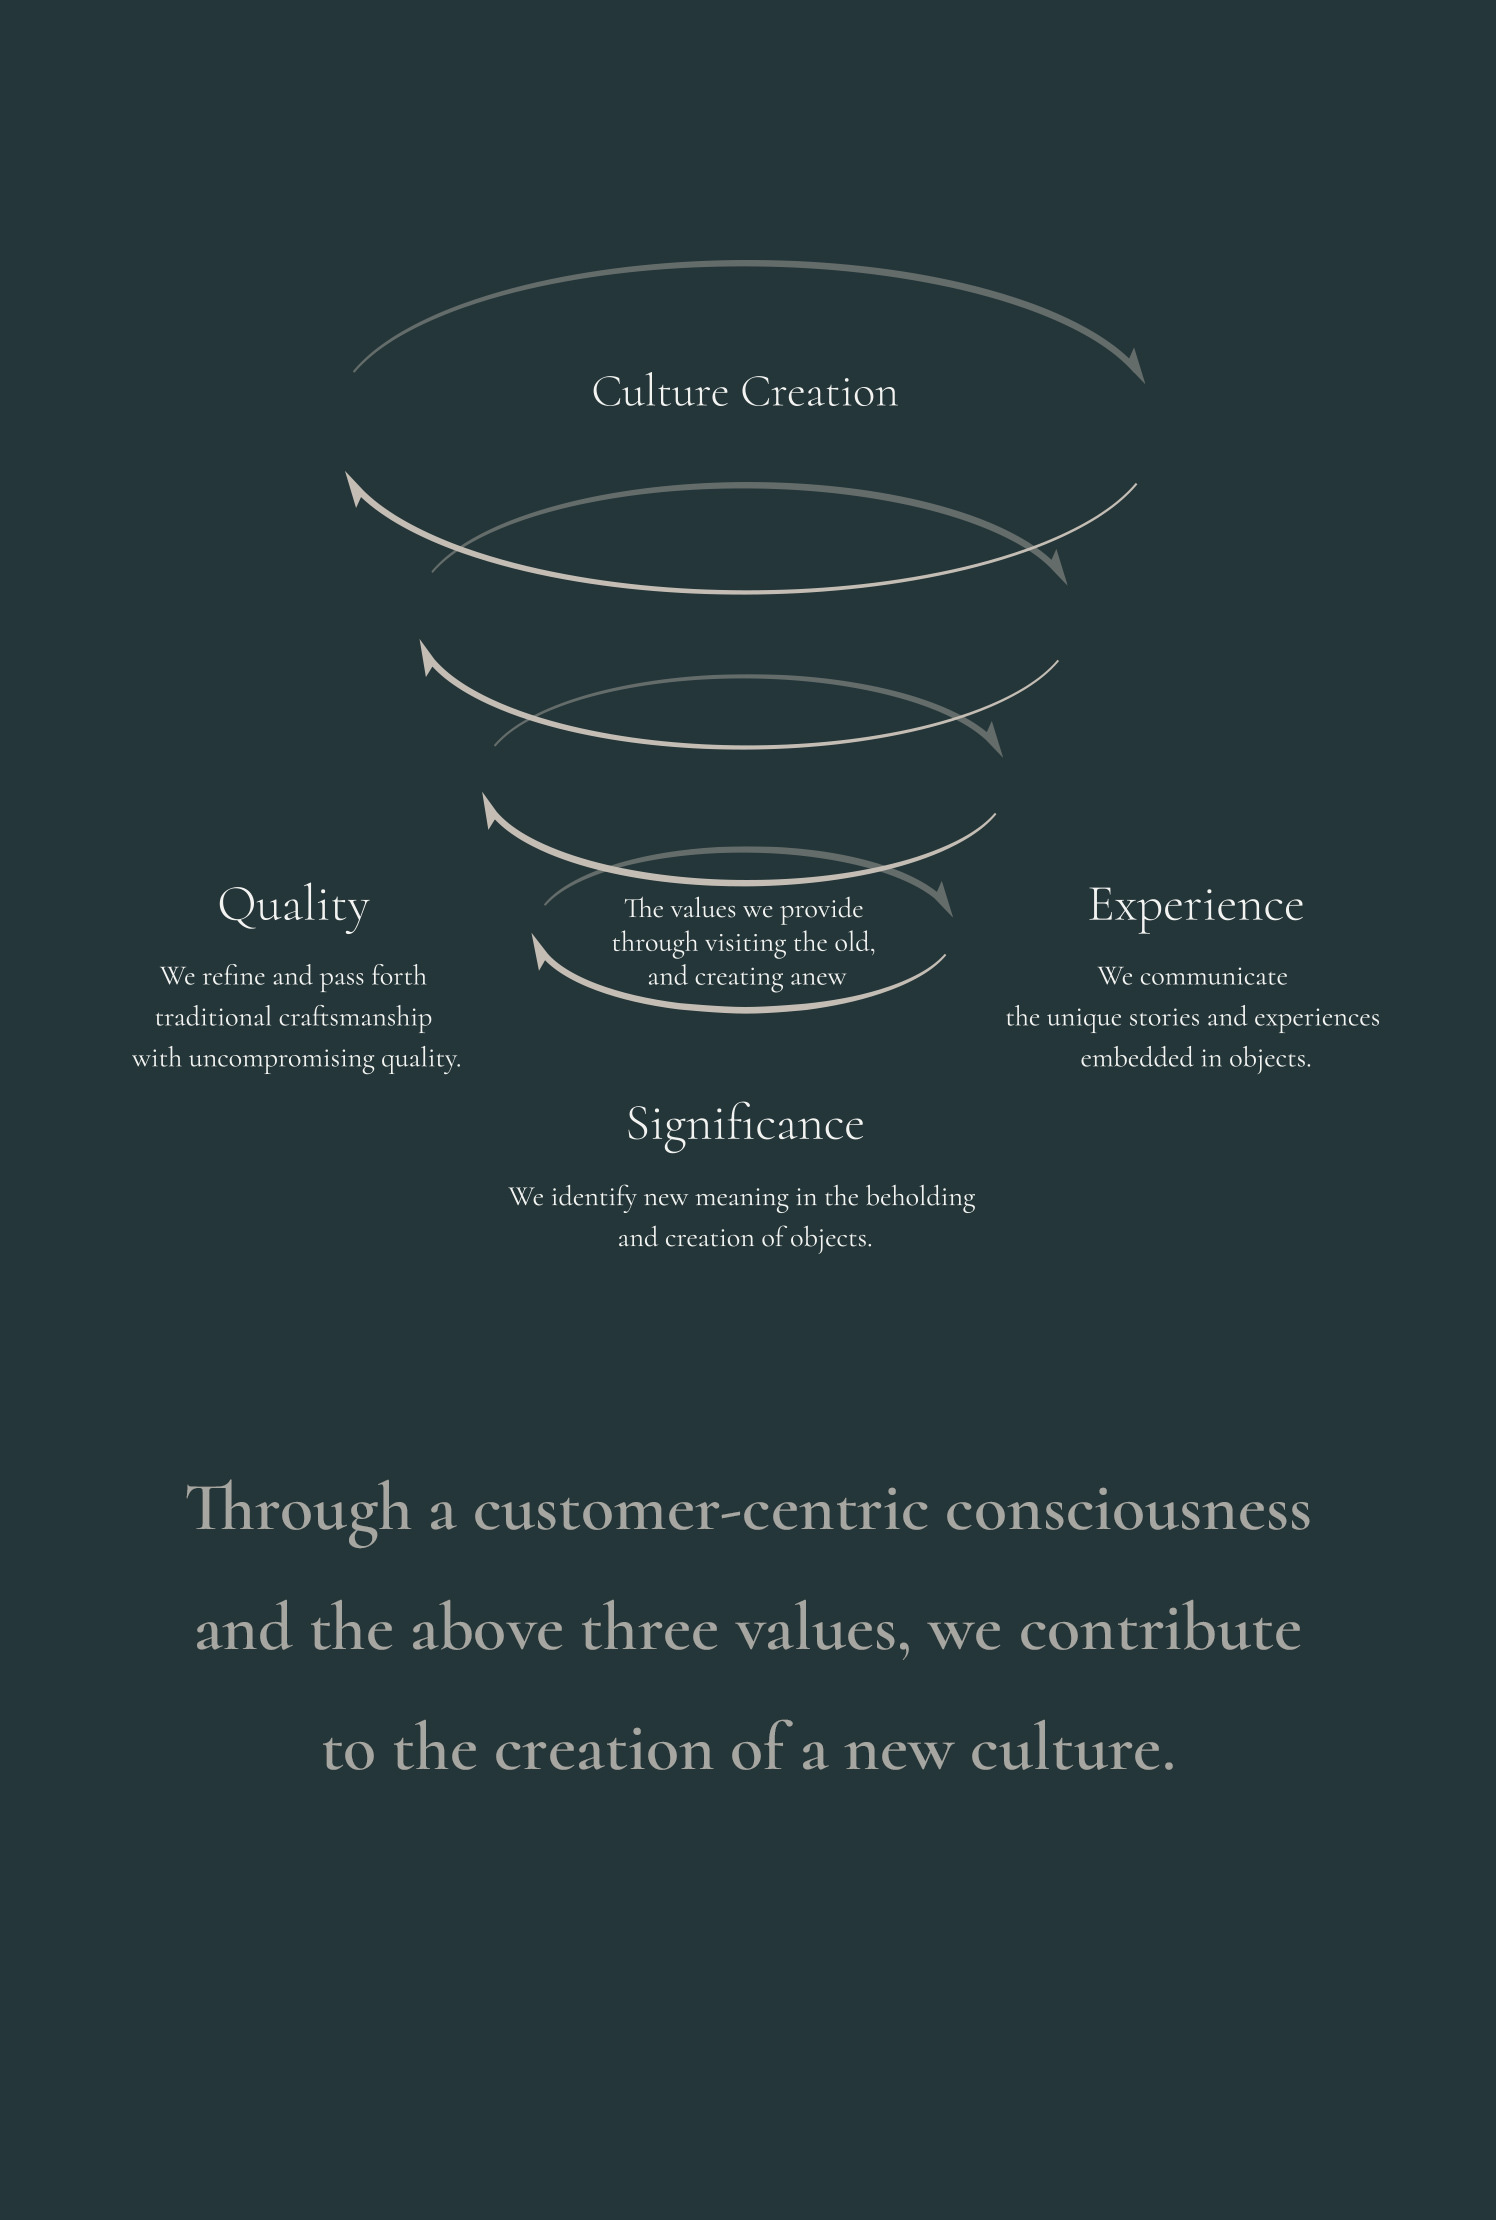 Through a customer-centric consciousness and the above three values, we contribute to the creation of a new culture.